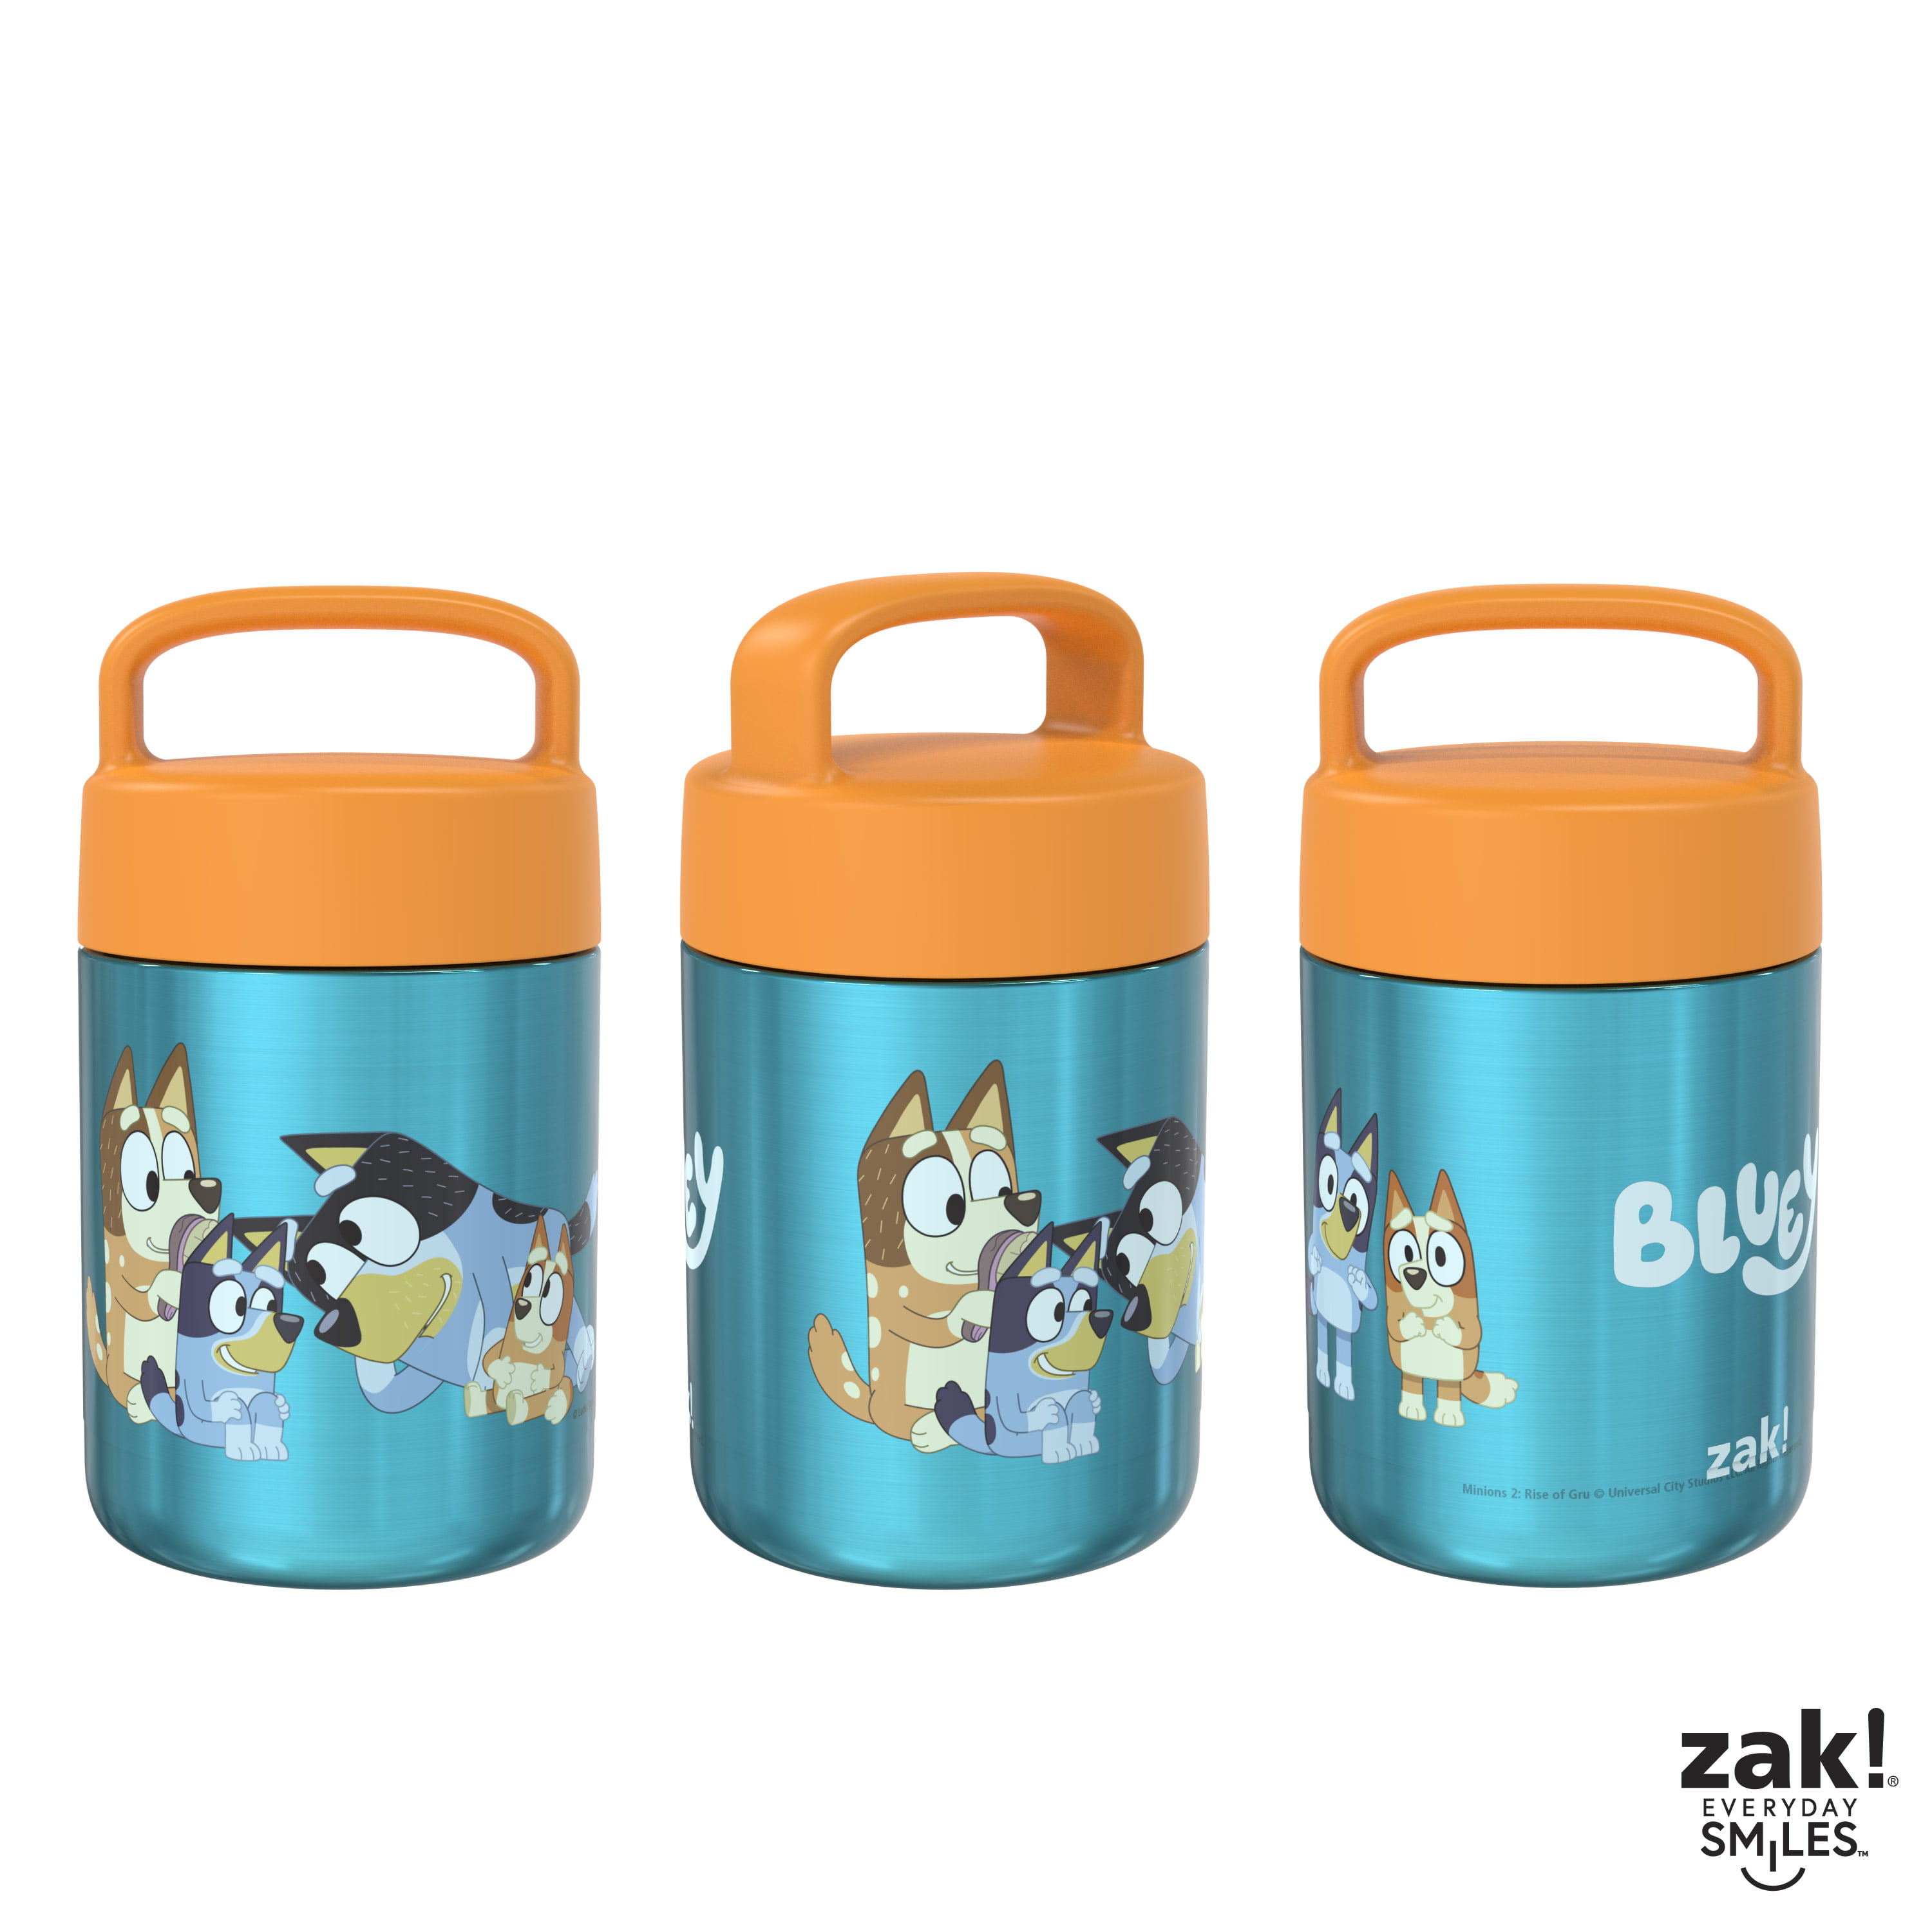  Zak Designs Bluey Reusable Plastic Bento Box with Leak-Proof  Seal, Carrying Handle, Microwave Steam Vent, and Individual Containers for  Kids' Packed Lunch (3-Piece Set) : CDs & Vinyl